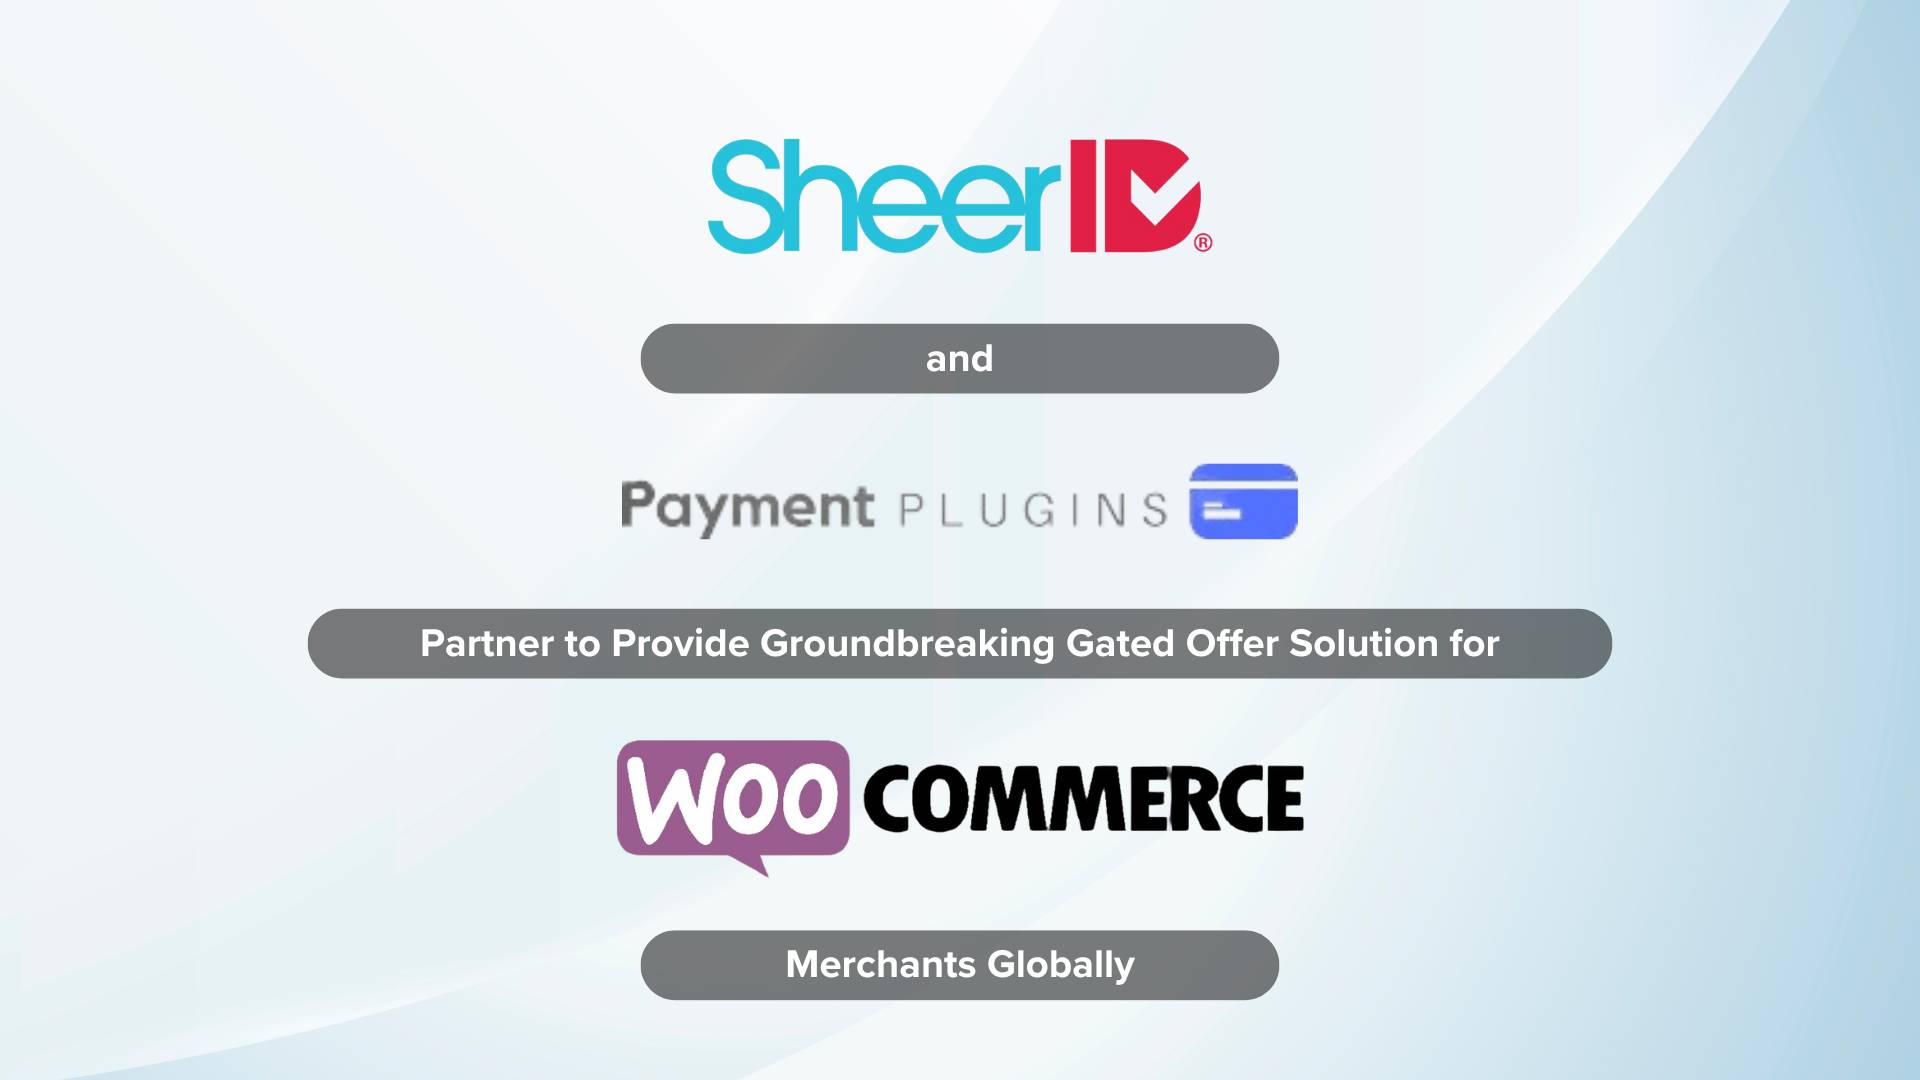 SheerID and Payment Plugins Partner to Provide Groundbreaking Gated Offer Solution for WooCommerce Merchants Globally